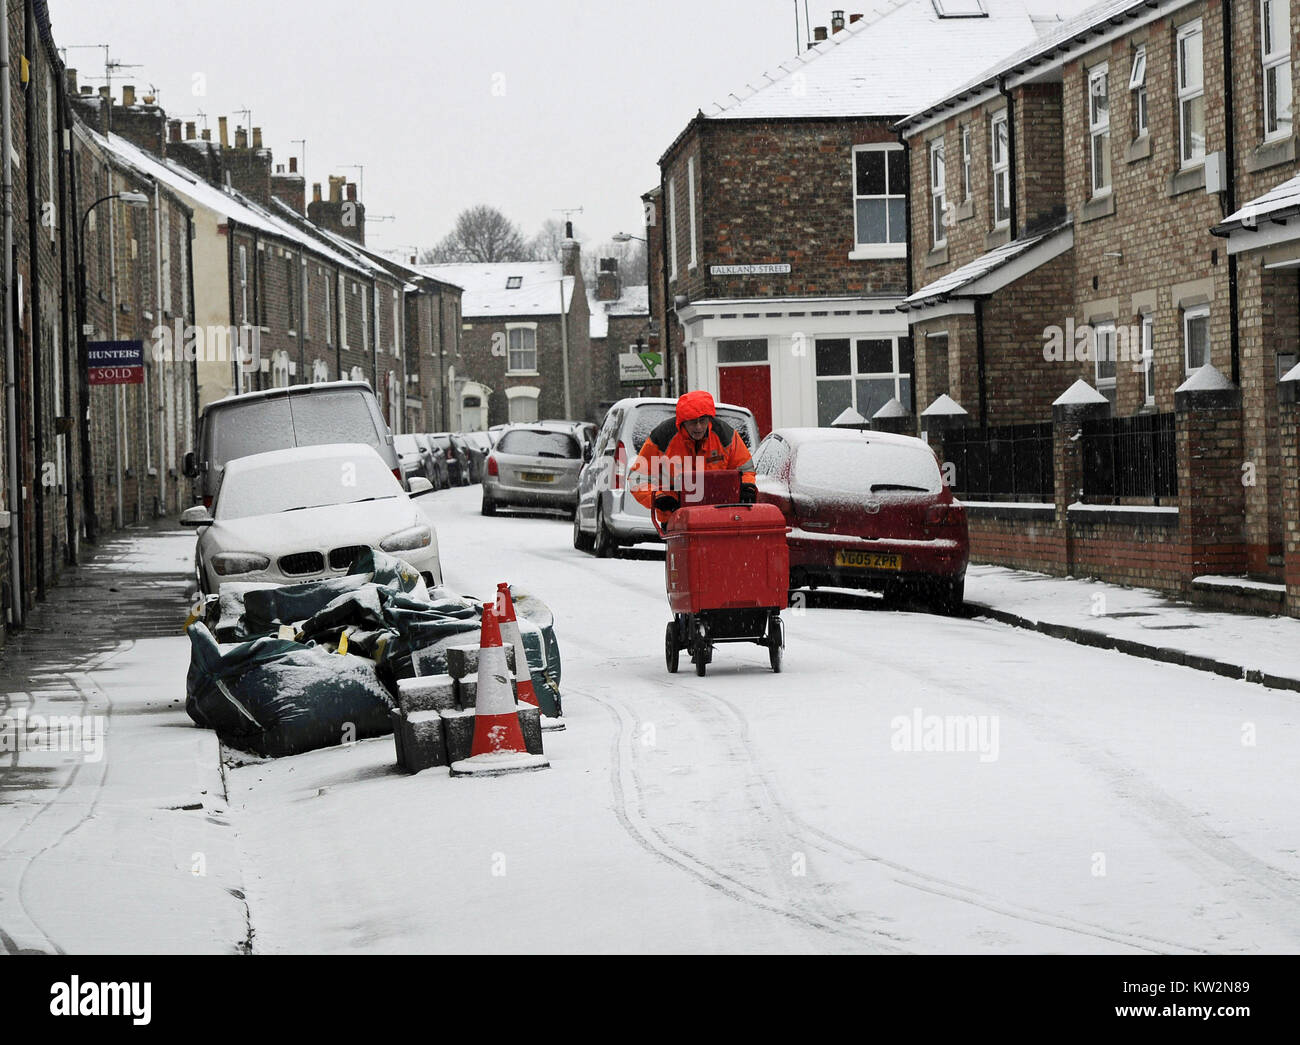 A postman makes deliveries through the snow in York after Britain saw one of the coldest nights of the year with temperatures falling to minus 12.3C at Loch Glascarnoch in the Scottish Highlands overnight and heavy snow expected over part of the north of England. Stock Photo